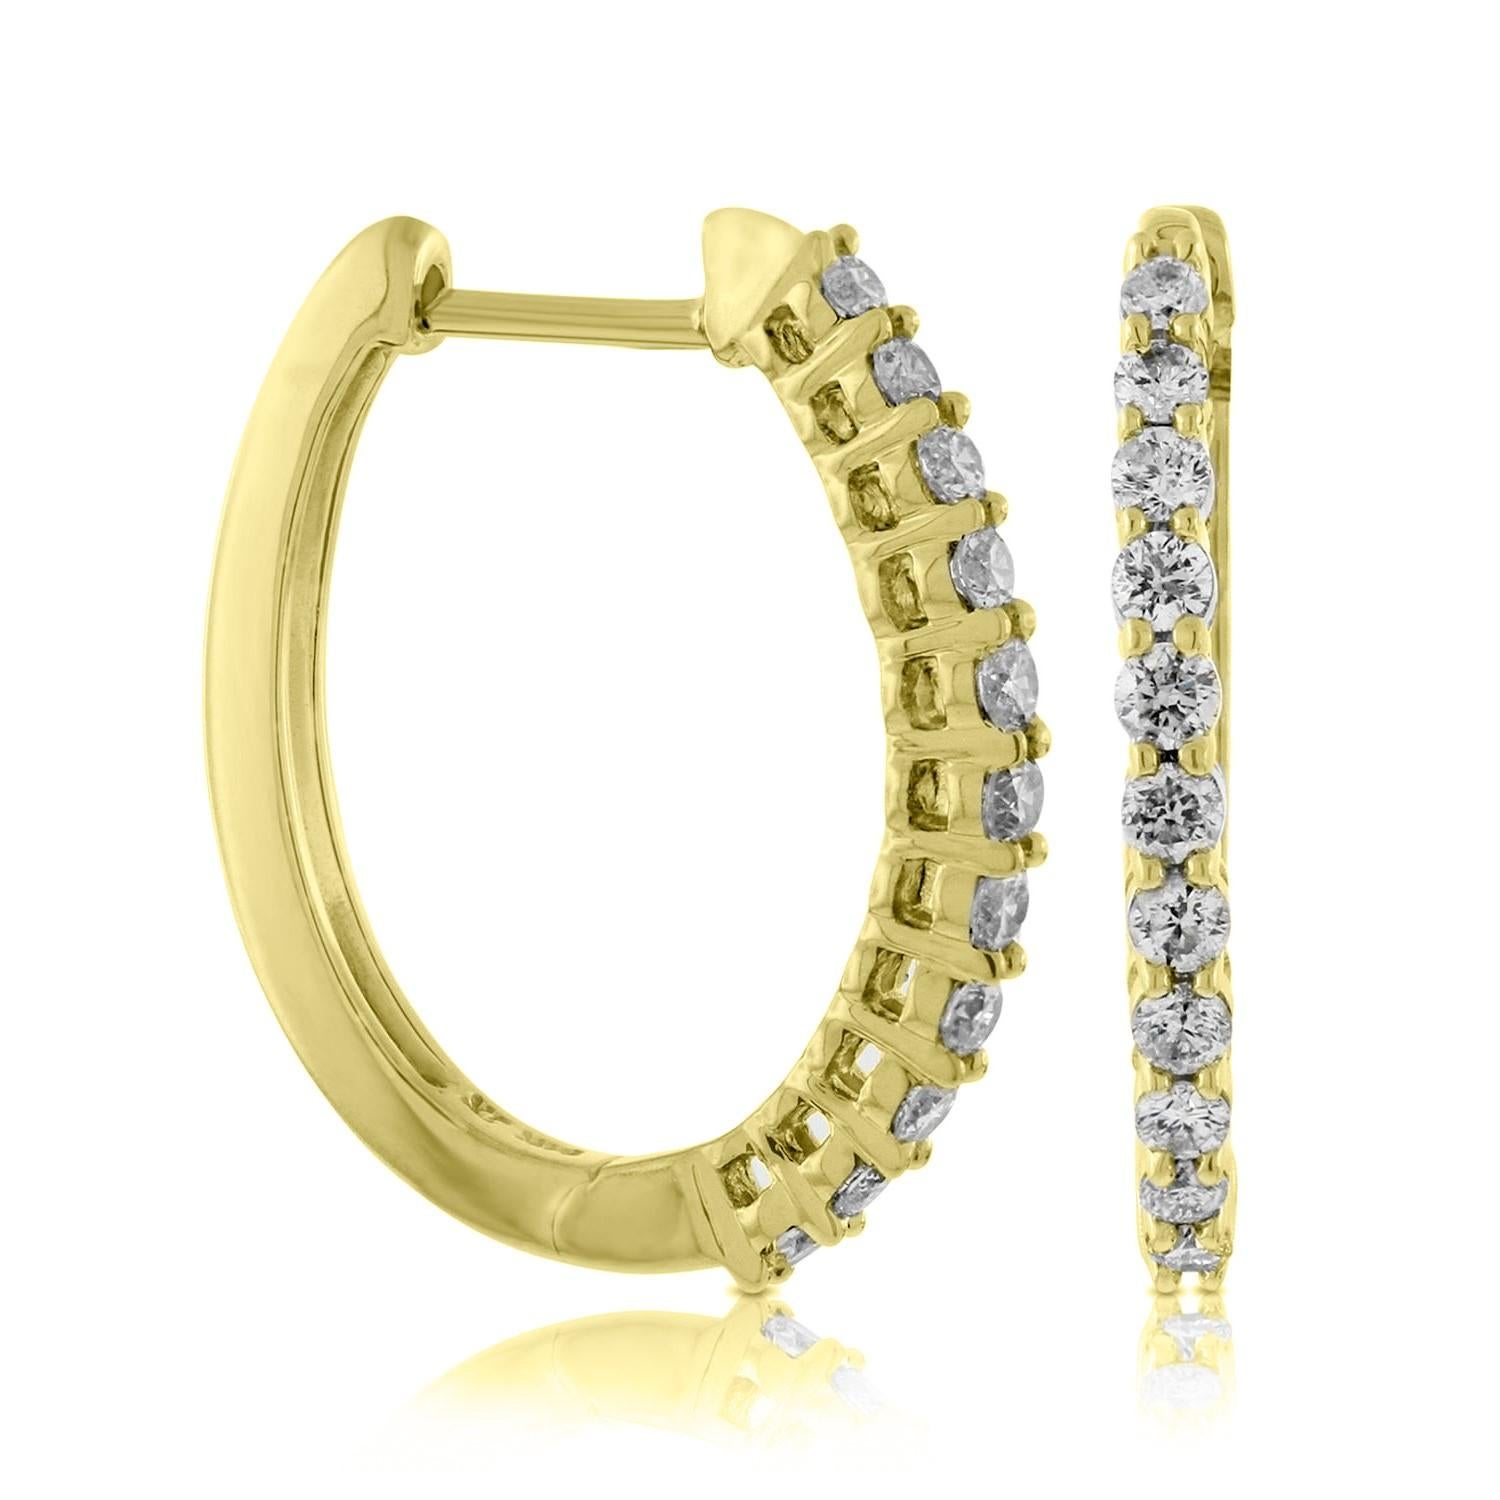 Nothing says luxury like an incredible pair of diamond round hoop earrings. These stunning brightly polished 14 karat yellow gold round-shaped hoop earrings feature a total of 24 round brilliant cut diamonds totaling .25 carats are prong set on the